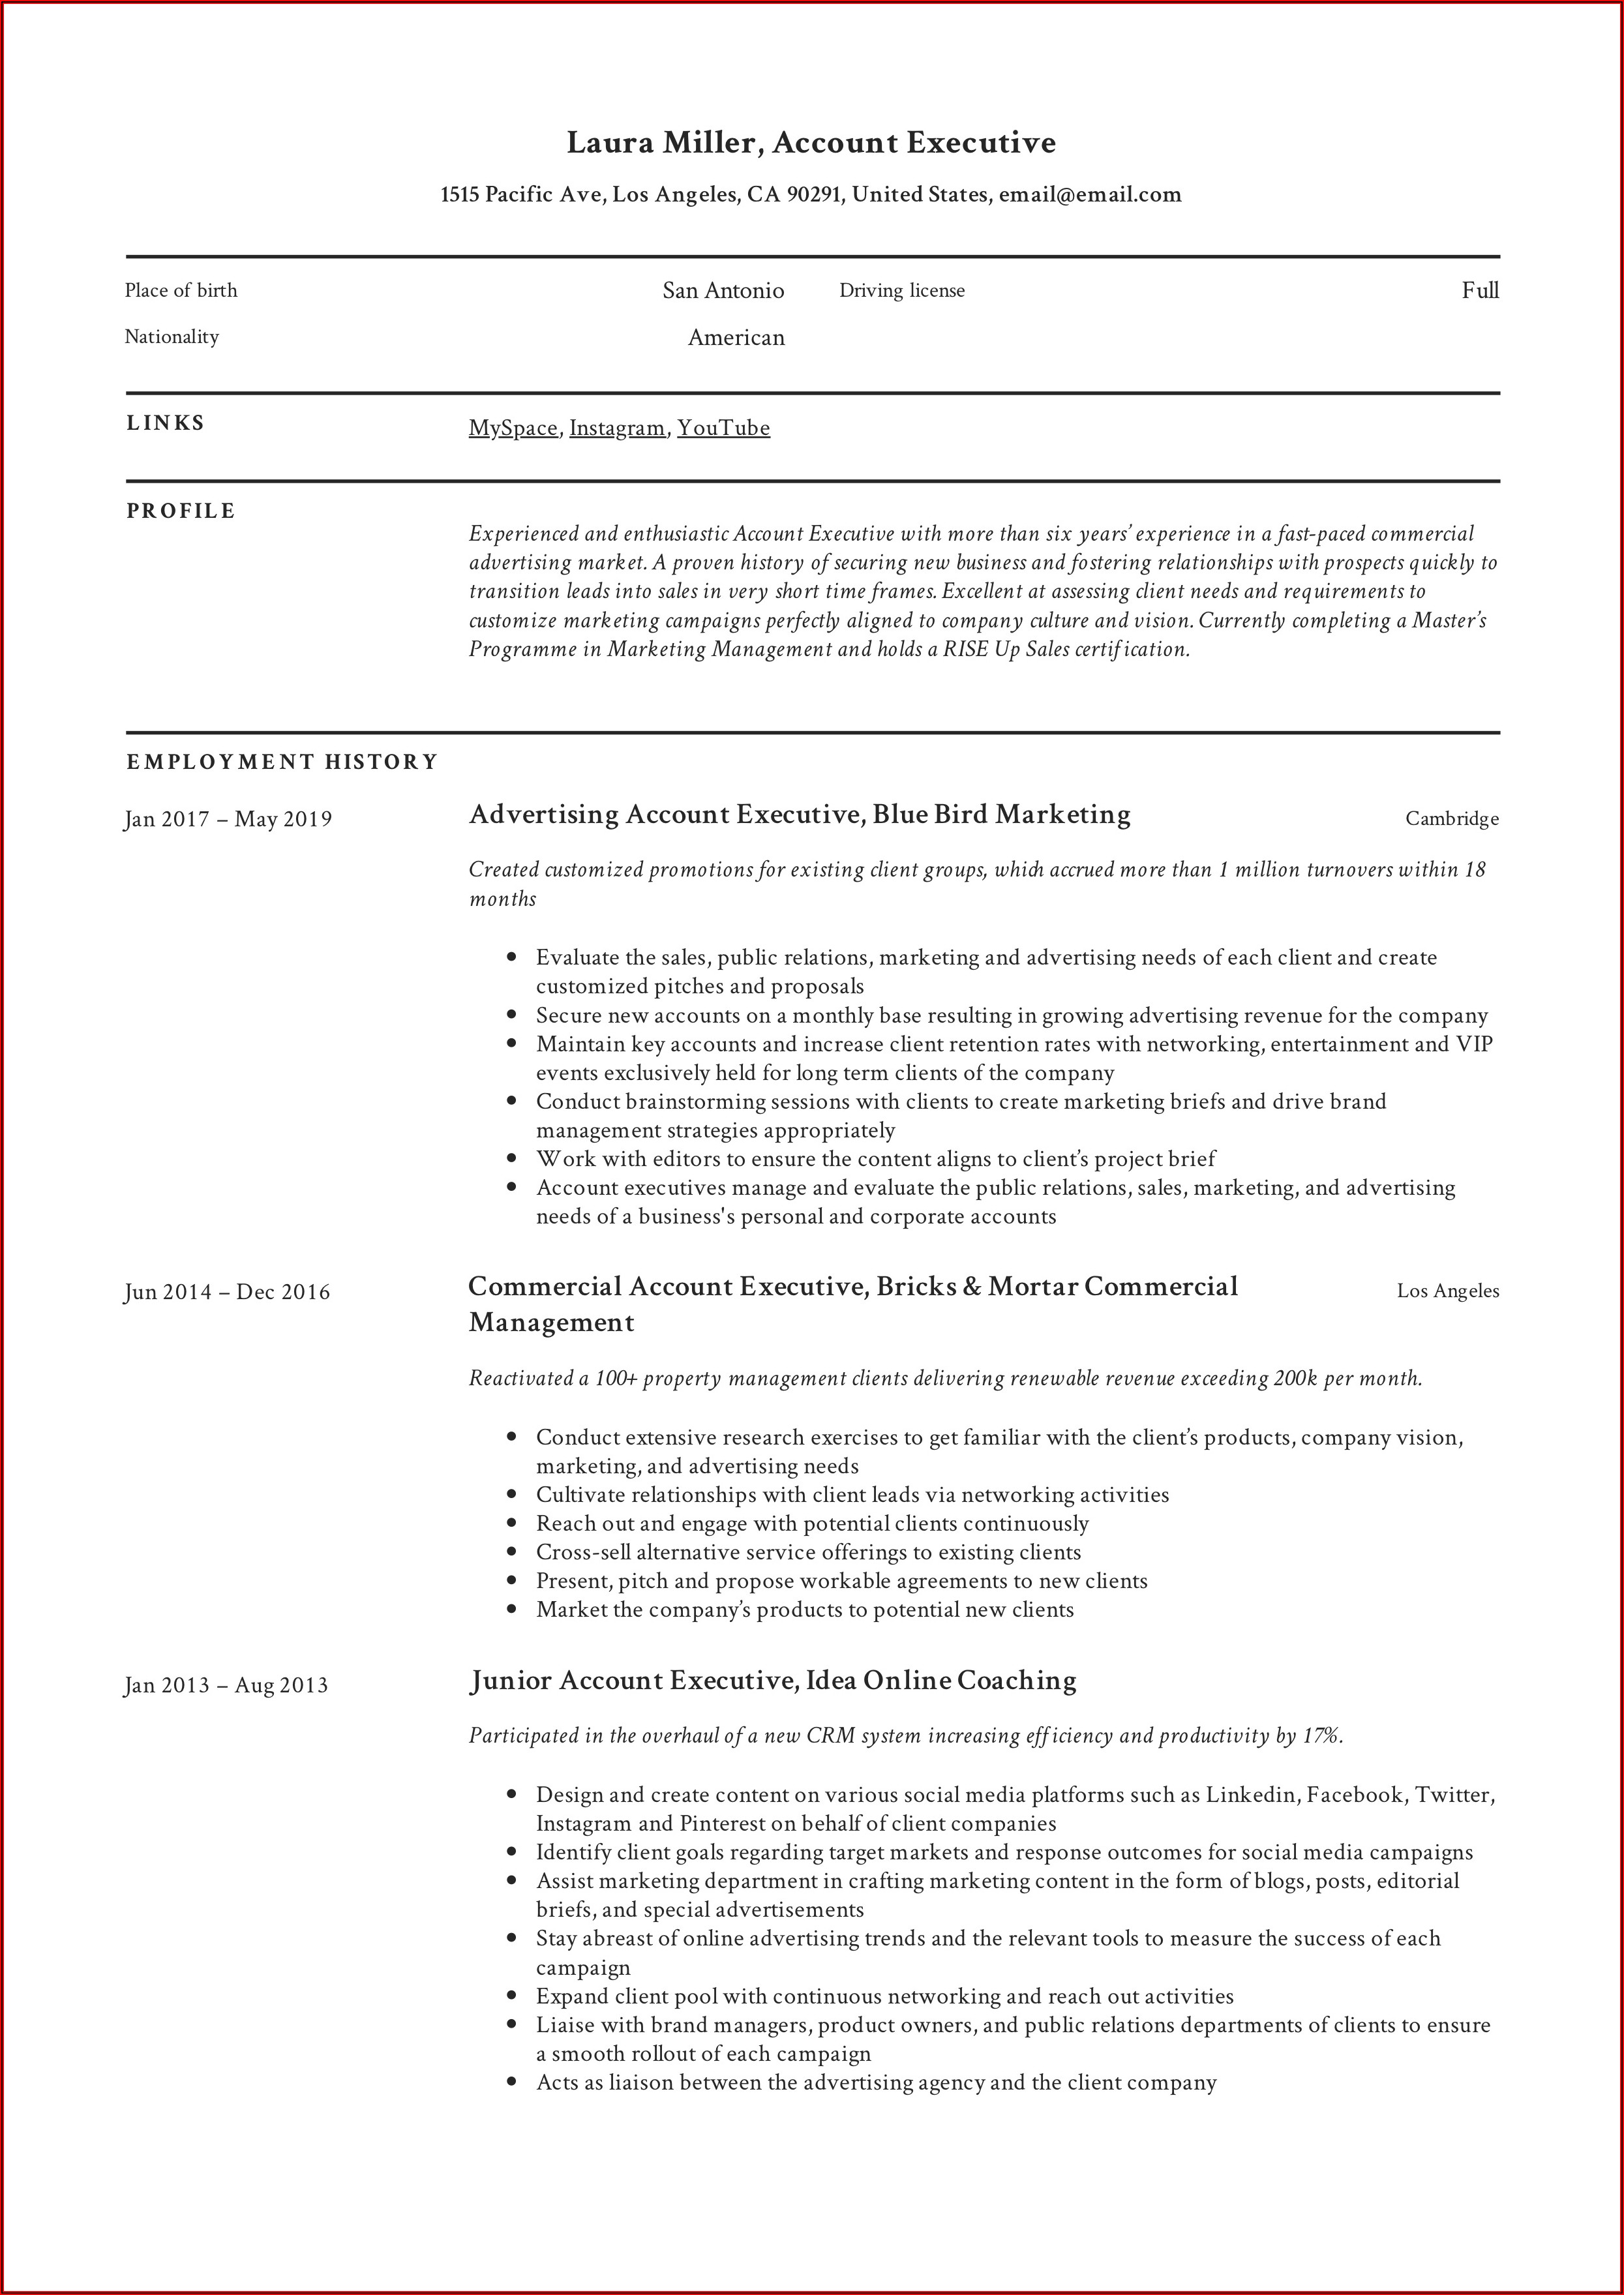 Resume Templates For Account Executive